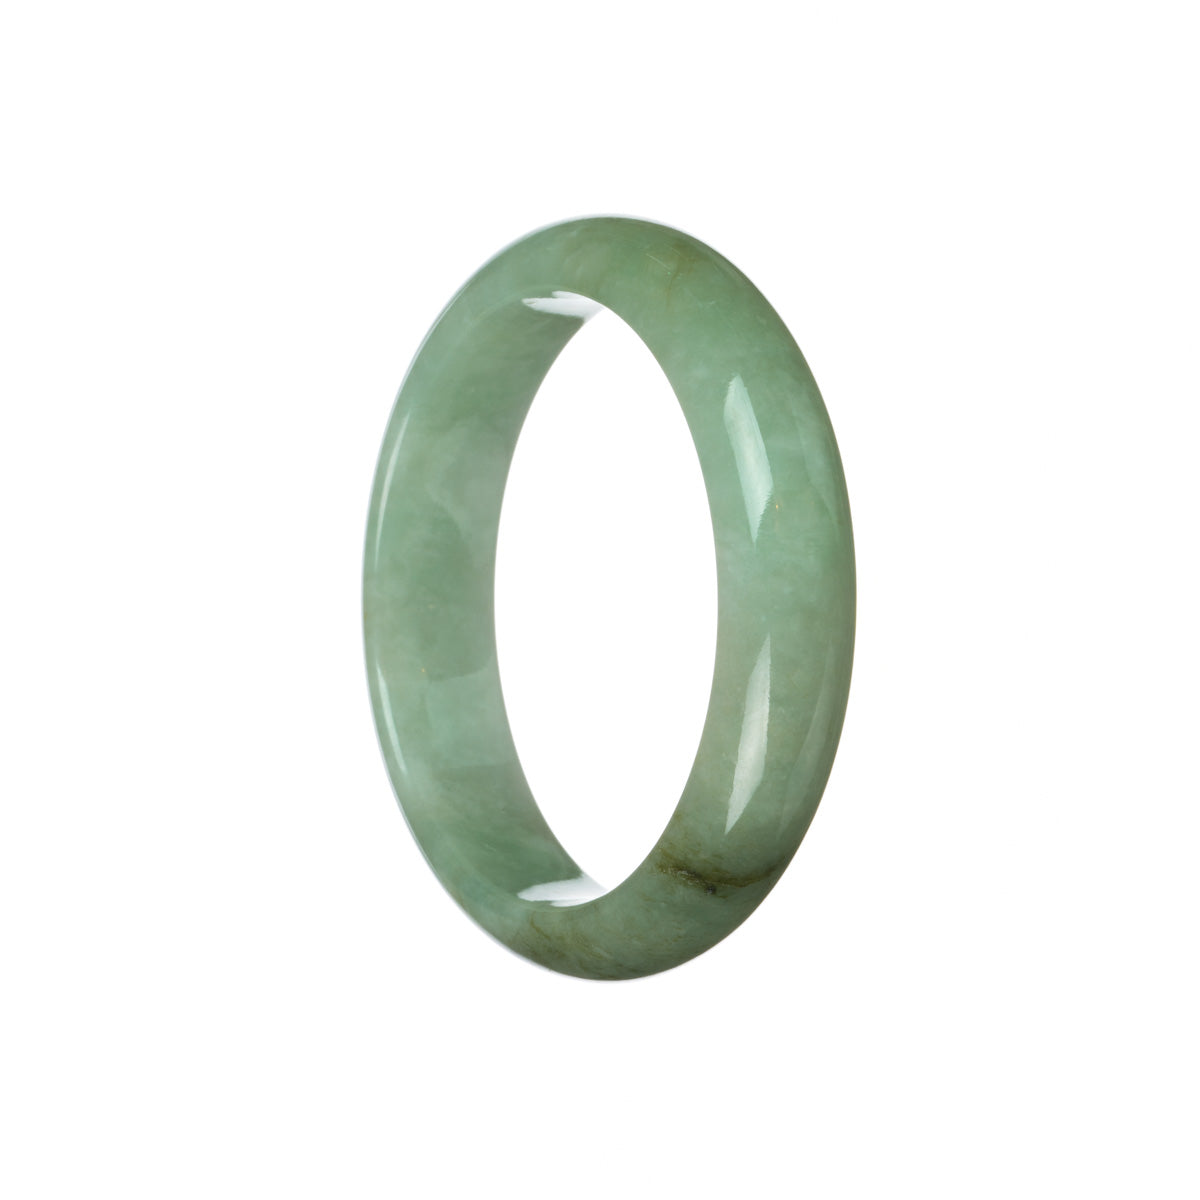 An elegant half moon-shaped green jadeite jade bangle, measuring 57mm in diameter, perfect for adding a touch of natural beauty to any outfit.